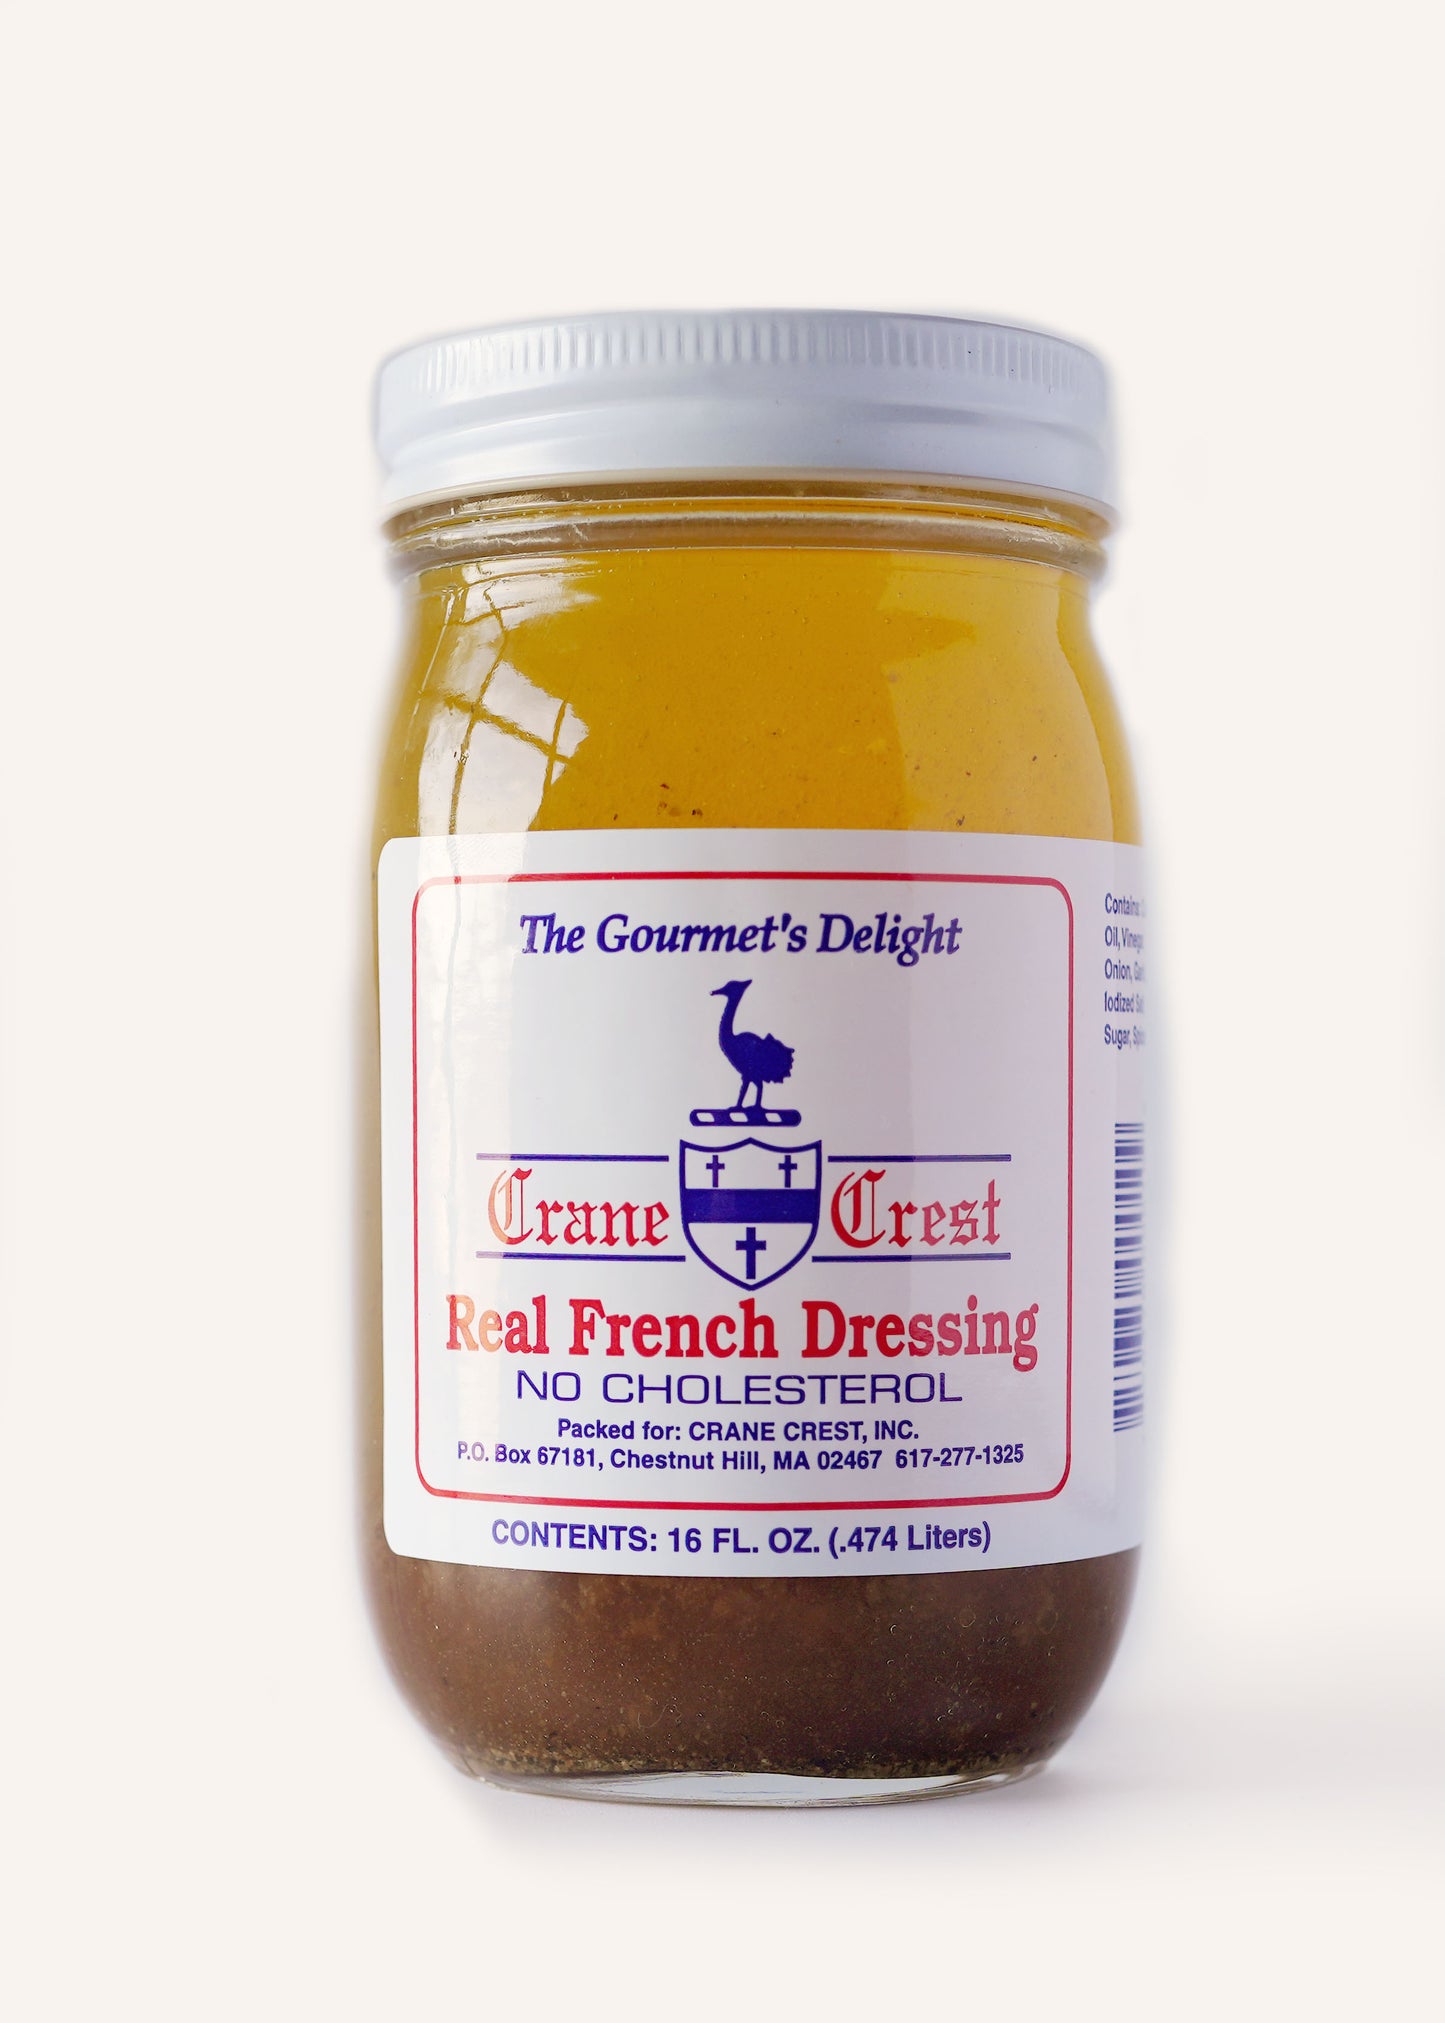 Real French Dressing